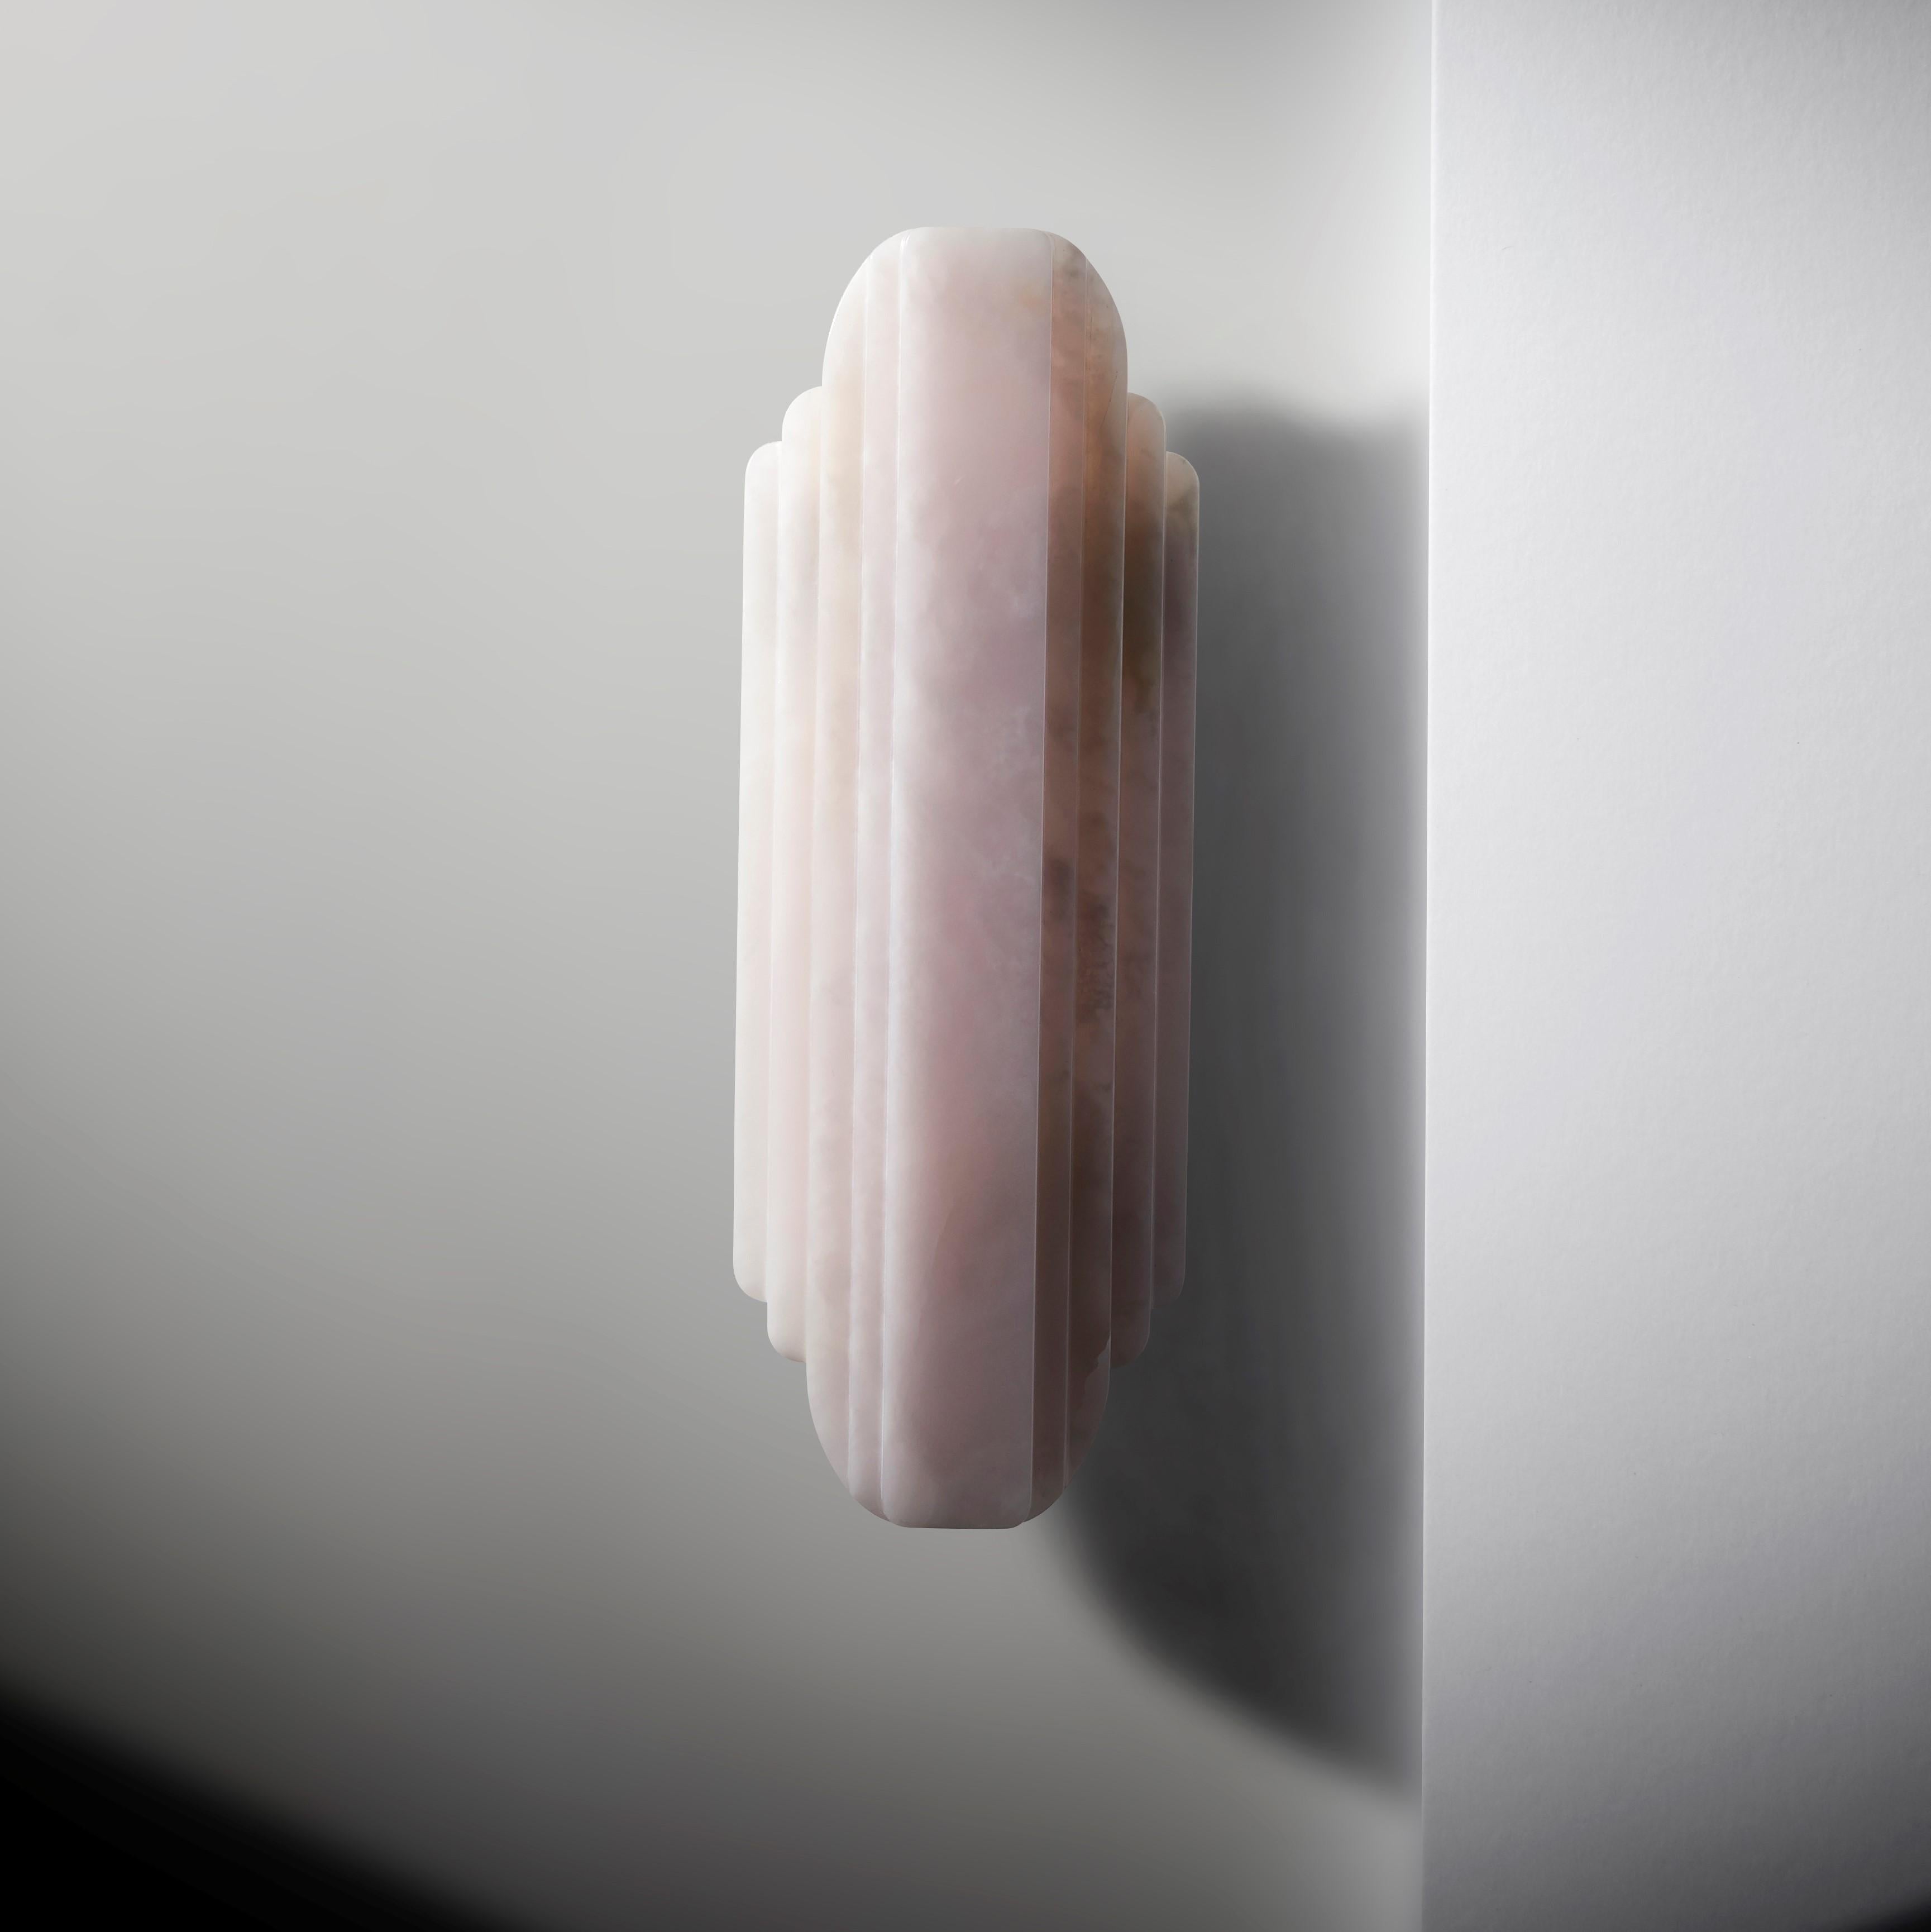 Set of 2 Walljewel by Lisette Rützou
Dimensions: 15 x H 42 cm
Materials: rose, green and white onyx

 Lisette Rützou’s design is motivated by an urge to articulate a story. Inspired by the beauty of materials, form and architecture, each design